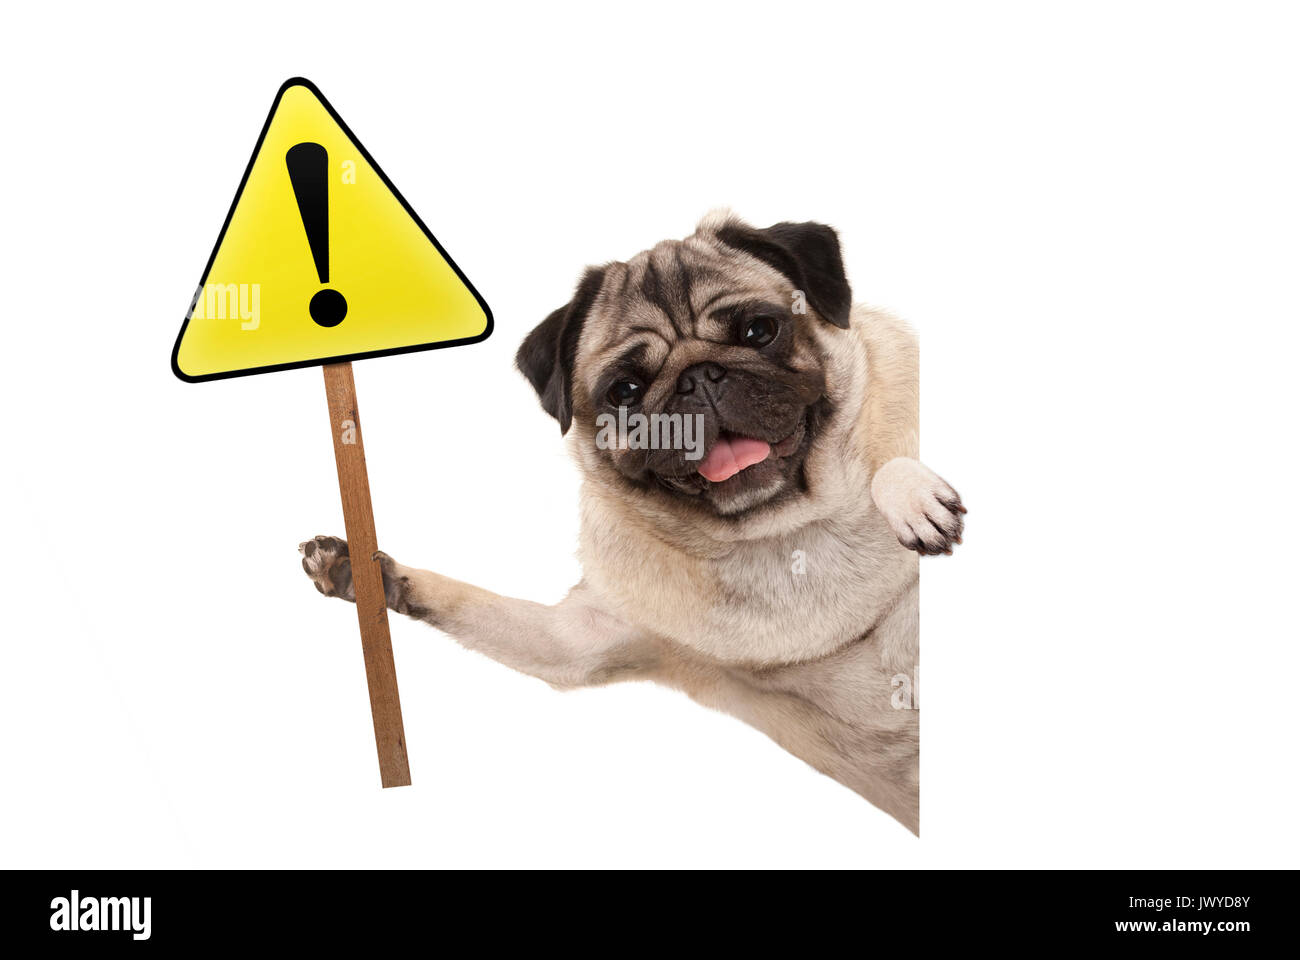 smiling pug puppy dog holding up yellow warning, attention sign with exclamation mark, isolated on white background Stock Photo